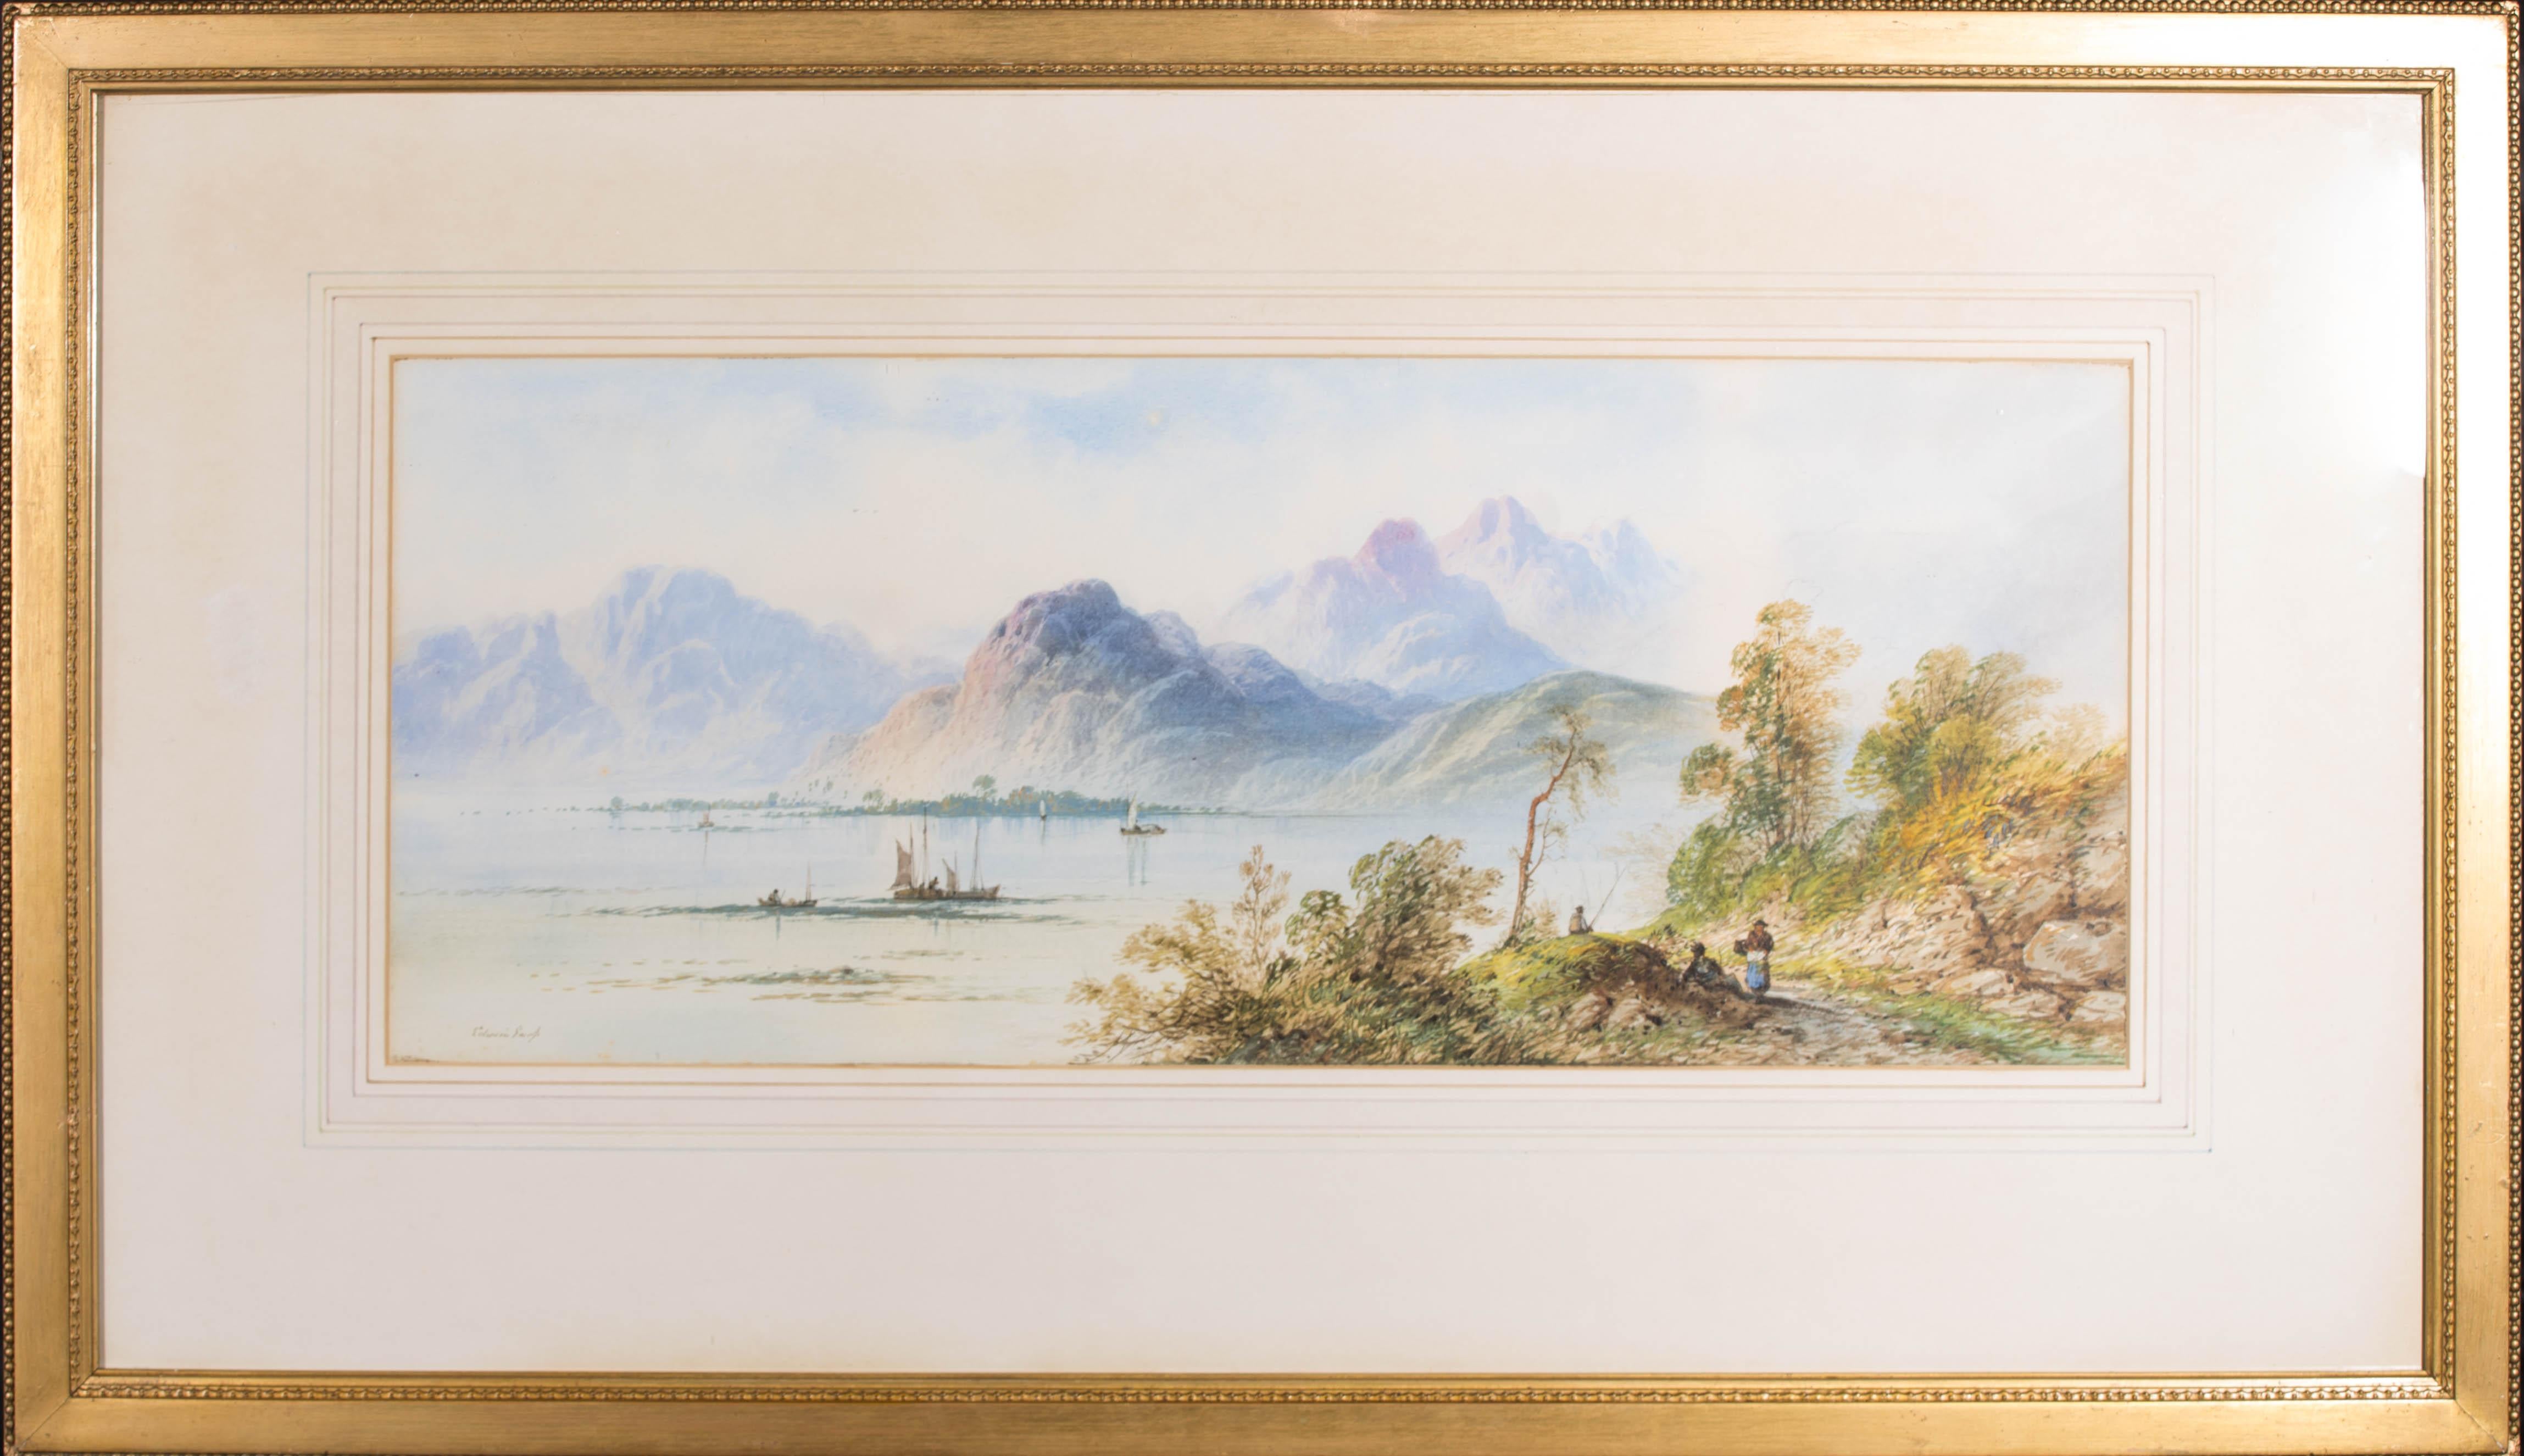 A fine and atmospheric watercolour painting with gouache details by the artist Edwin Earp. The scene depicts a view of Loch Lomond in Scotland, with fishermen, small boats and mountains in the distance. Signed to the lower left-hand corner.